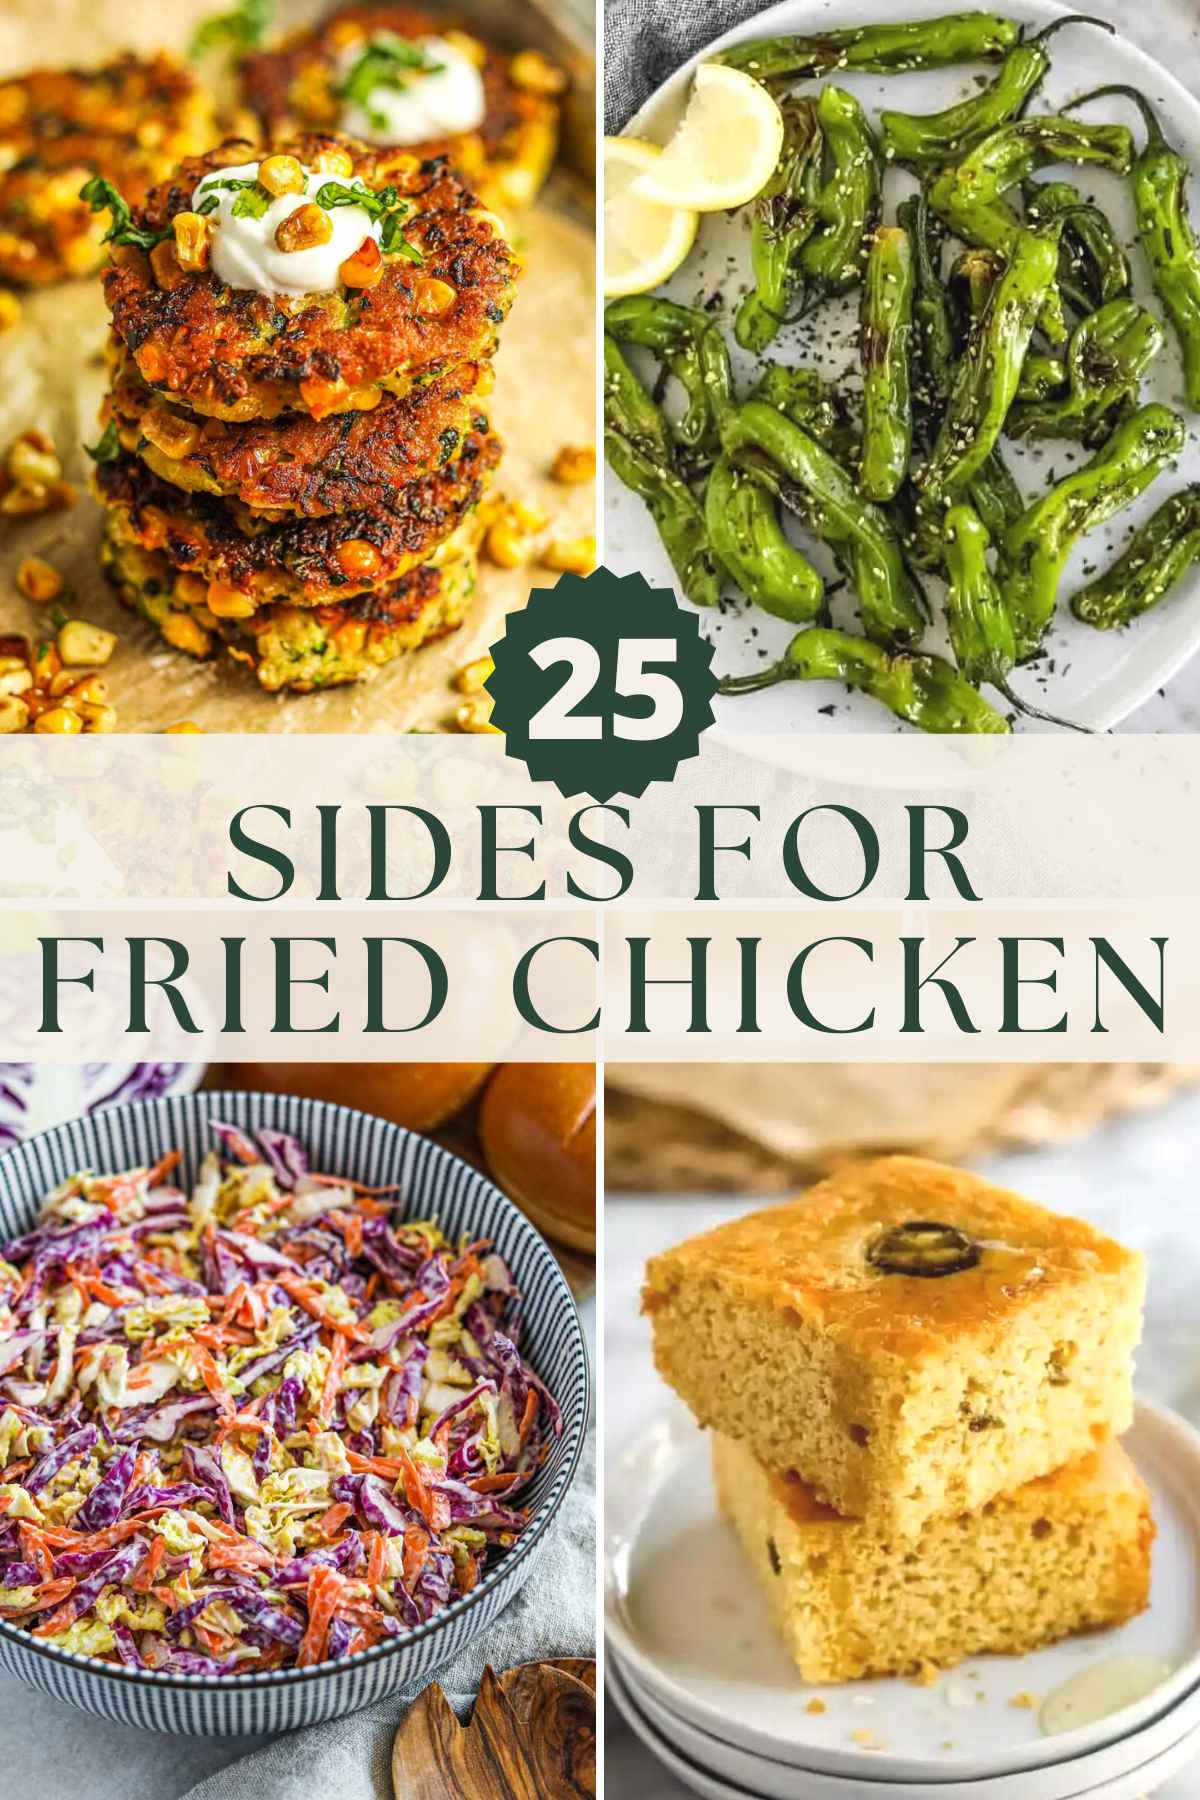 25 best sides for fried chicken, including fries, coleslaw, corn fritters, and jalapeño cheddar miso cornbread.